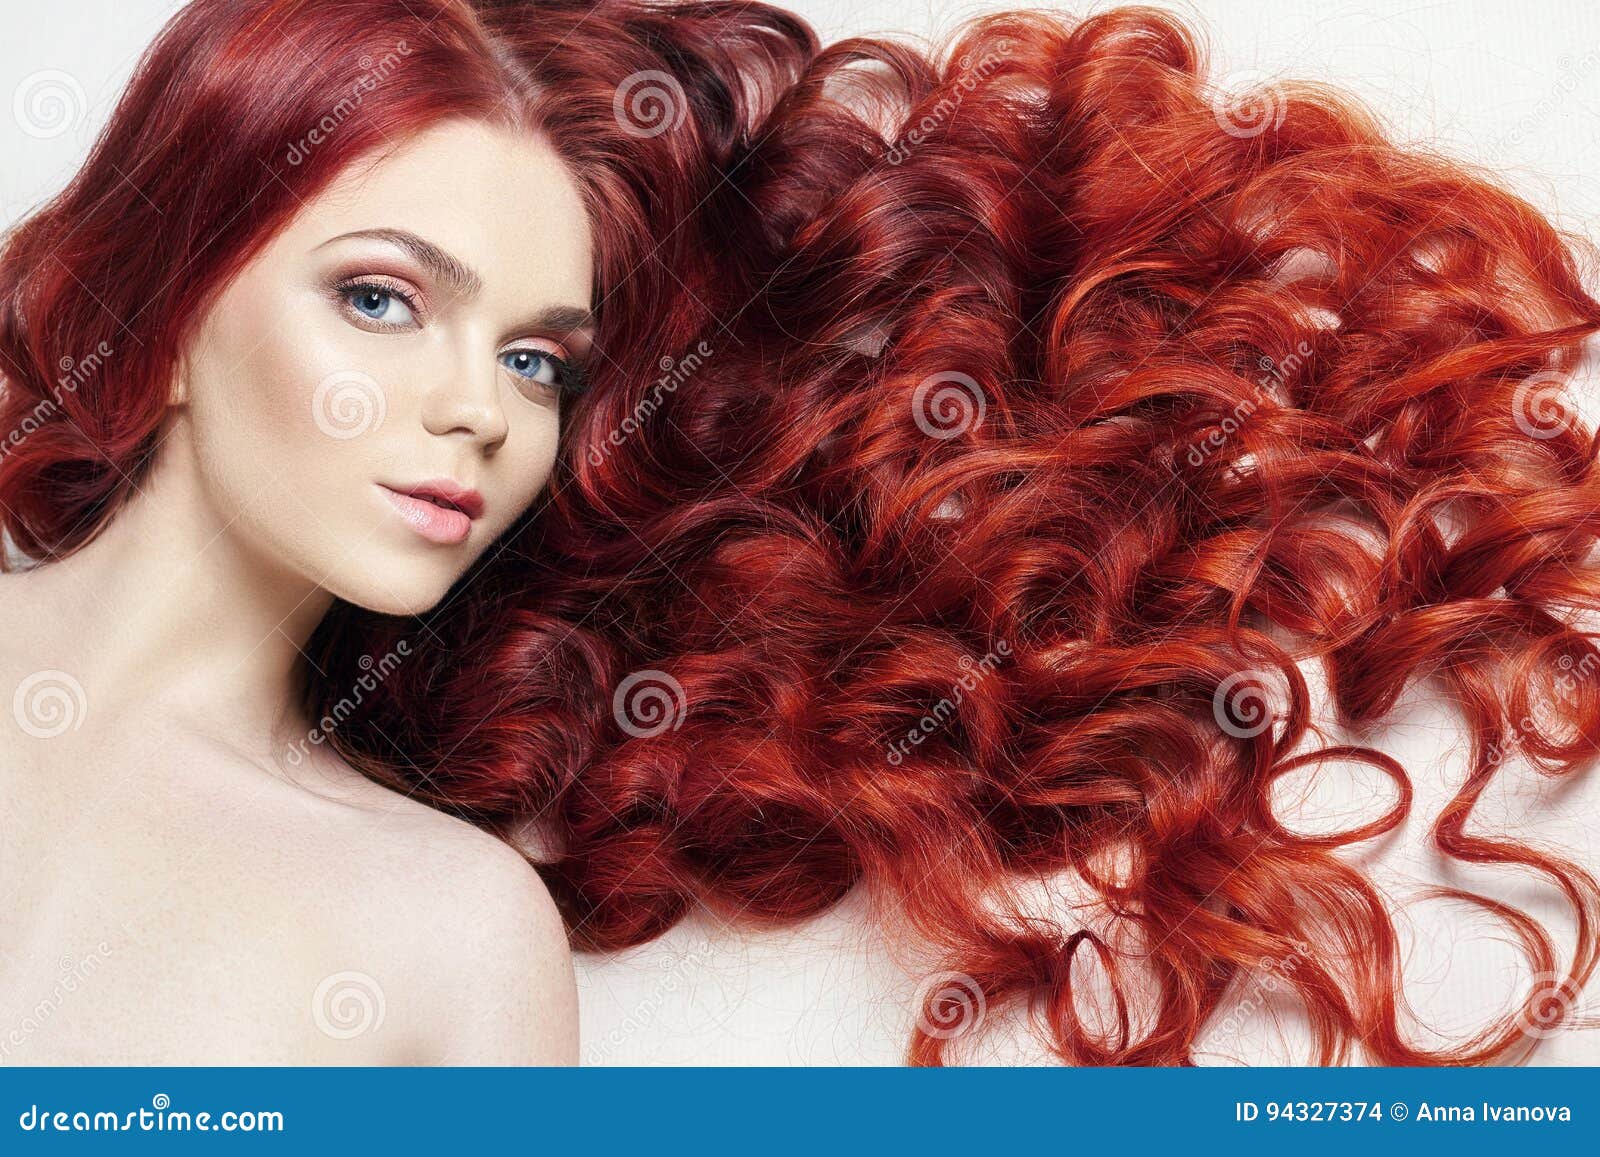 Natural red hair nude